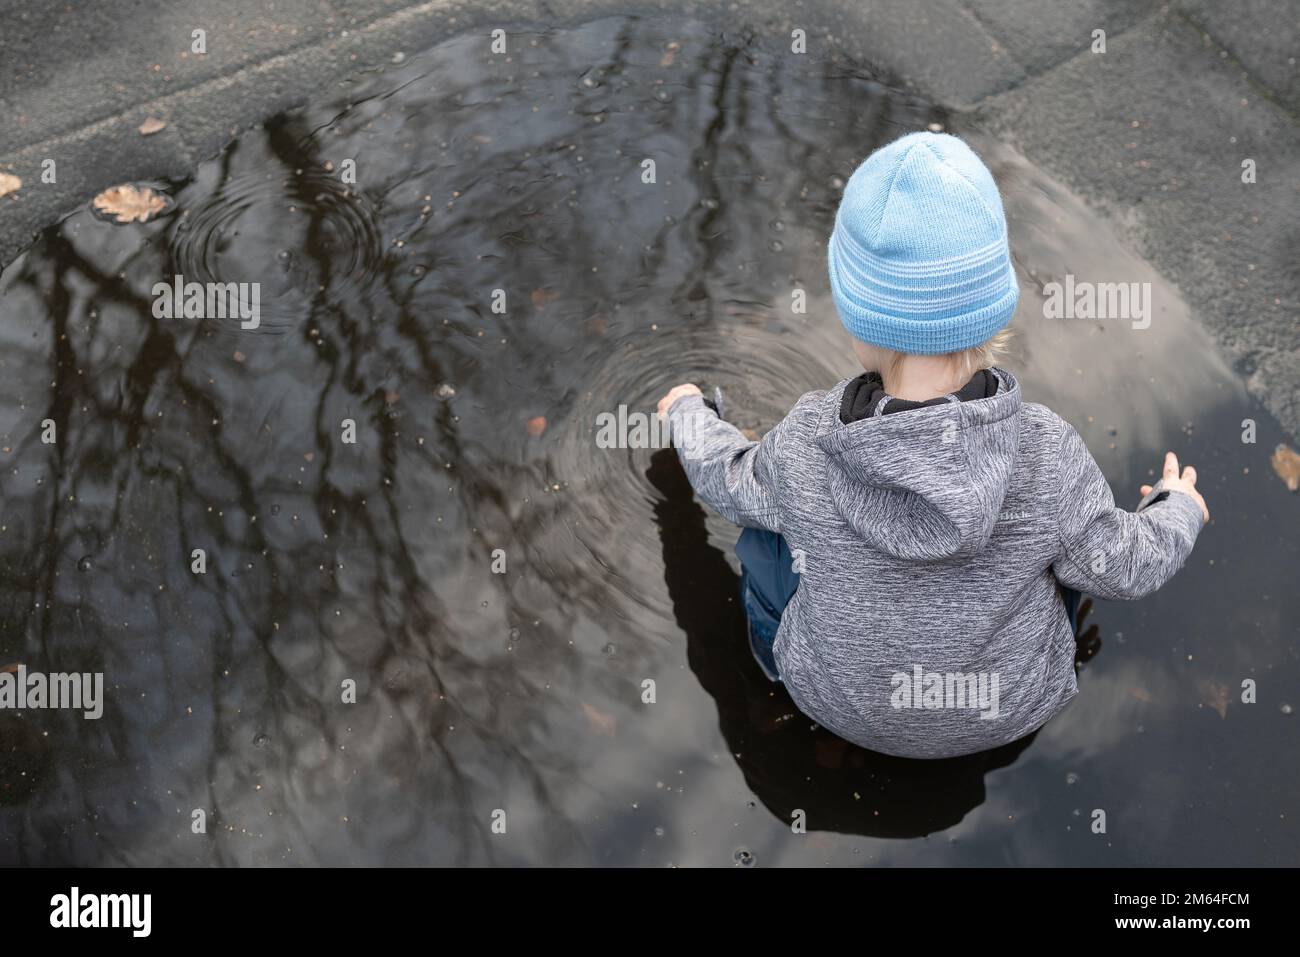 high angle view of two year old boy playing in puddle of water after rain shower Stock Photo